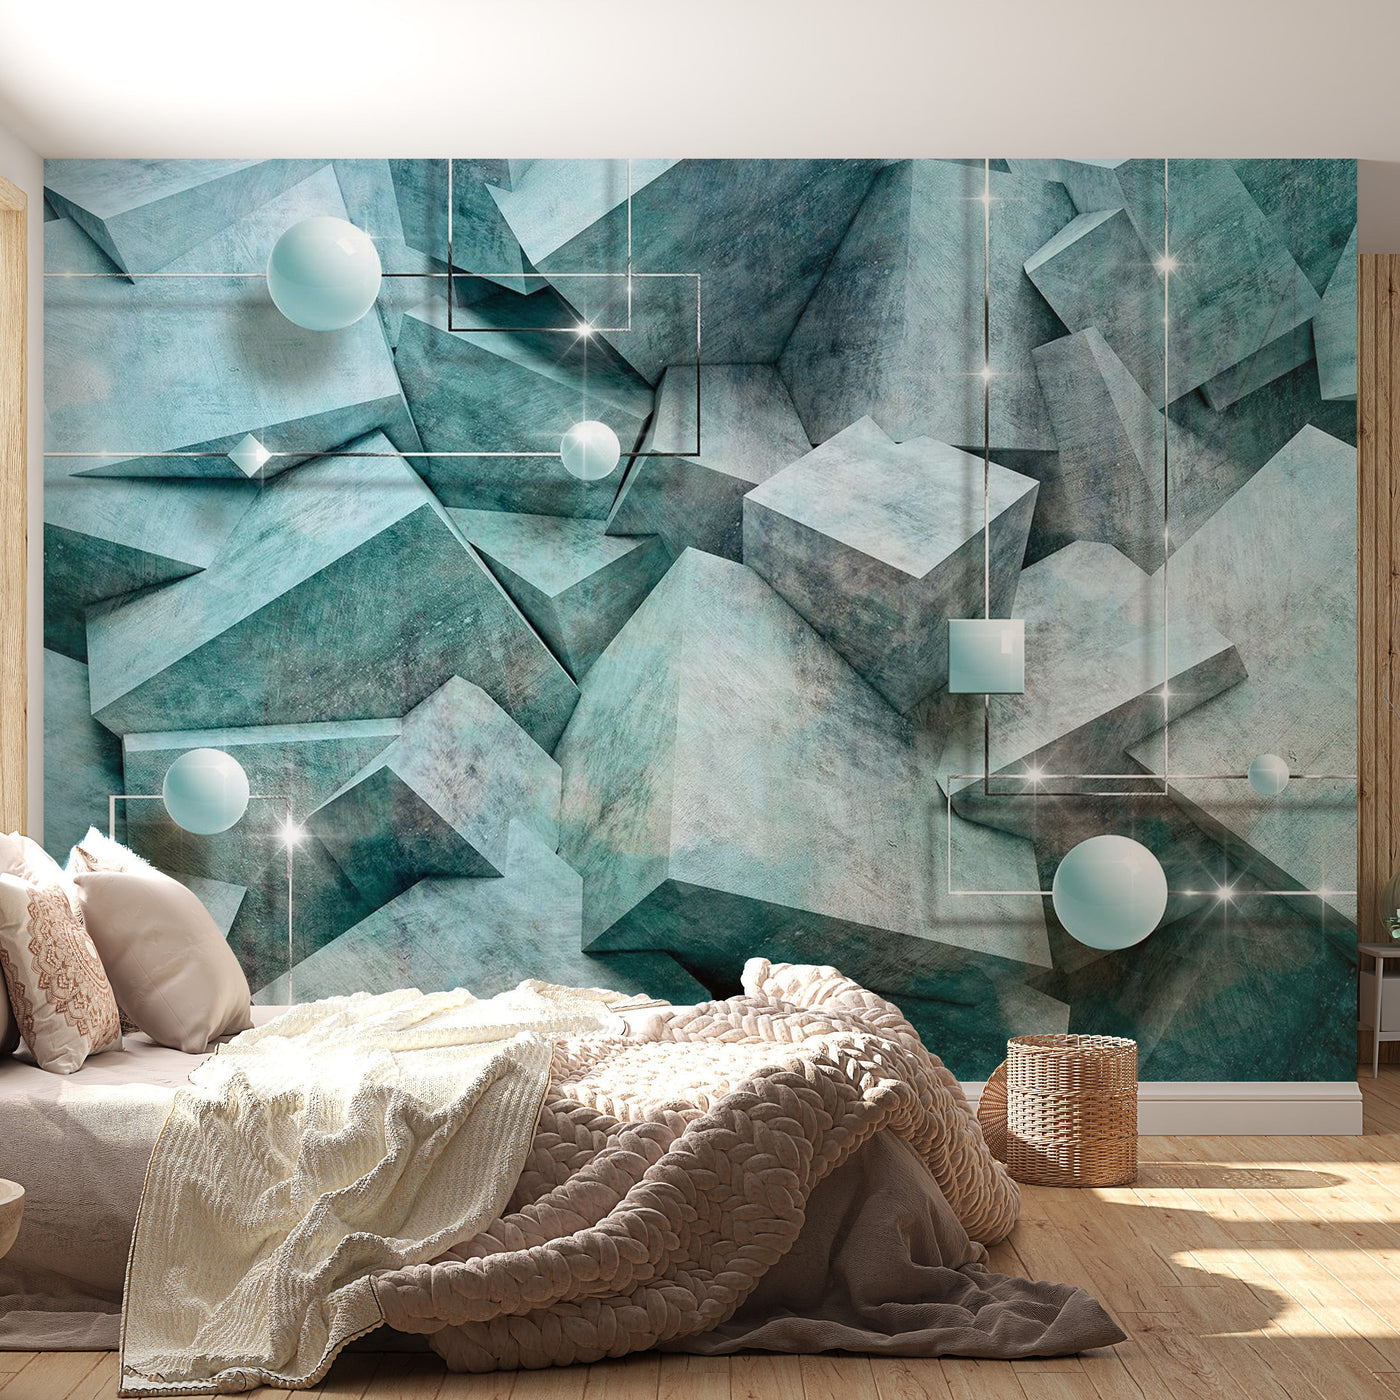 Peel & Stick Wall Mural - Concrete Blocks and Pearls - Removable Wall Decals